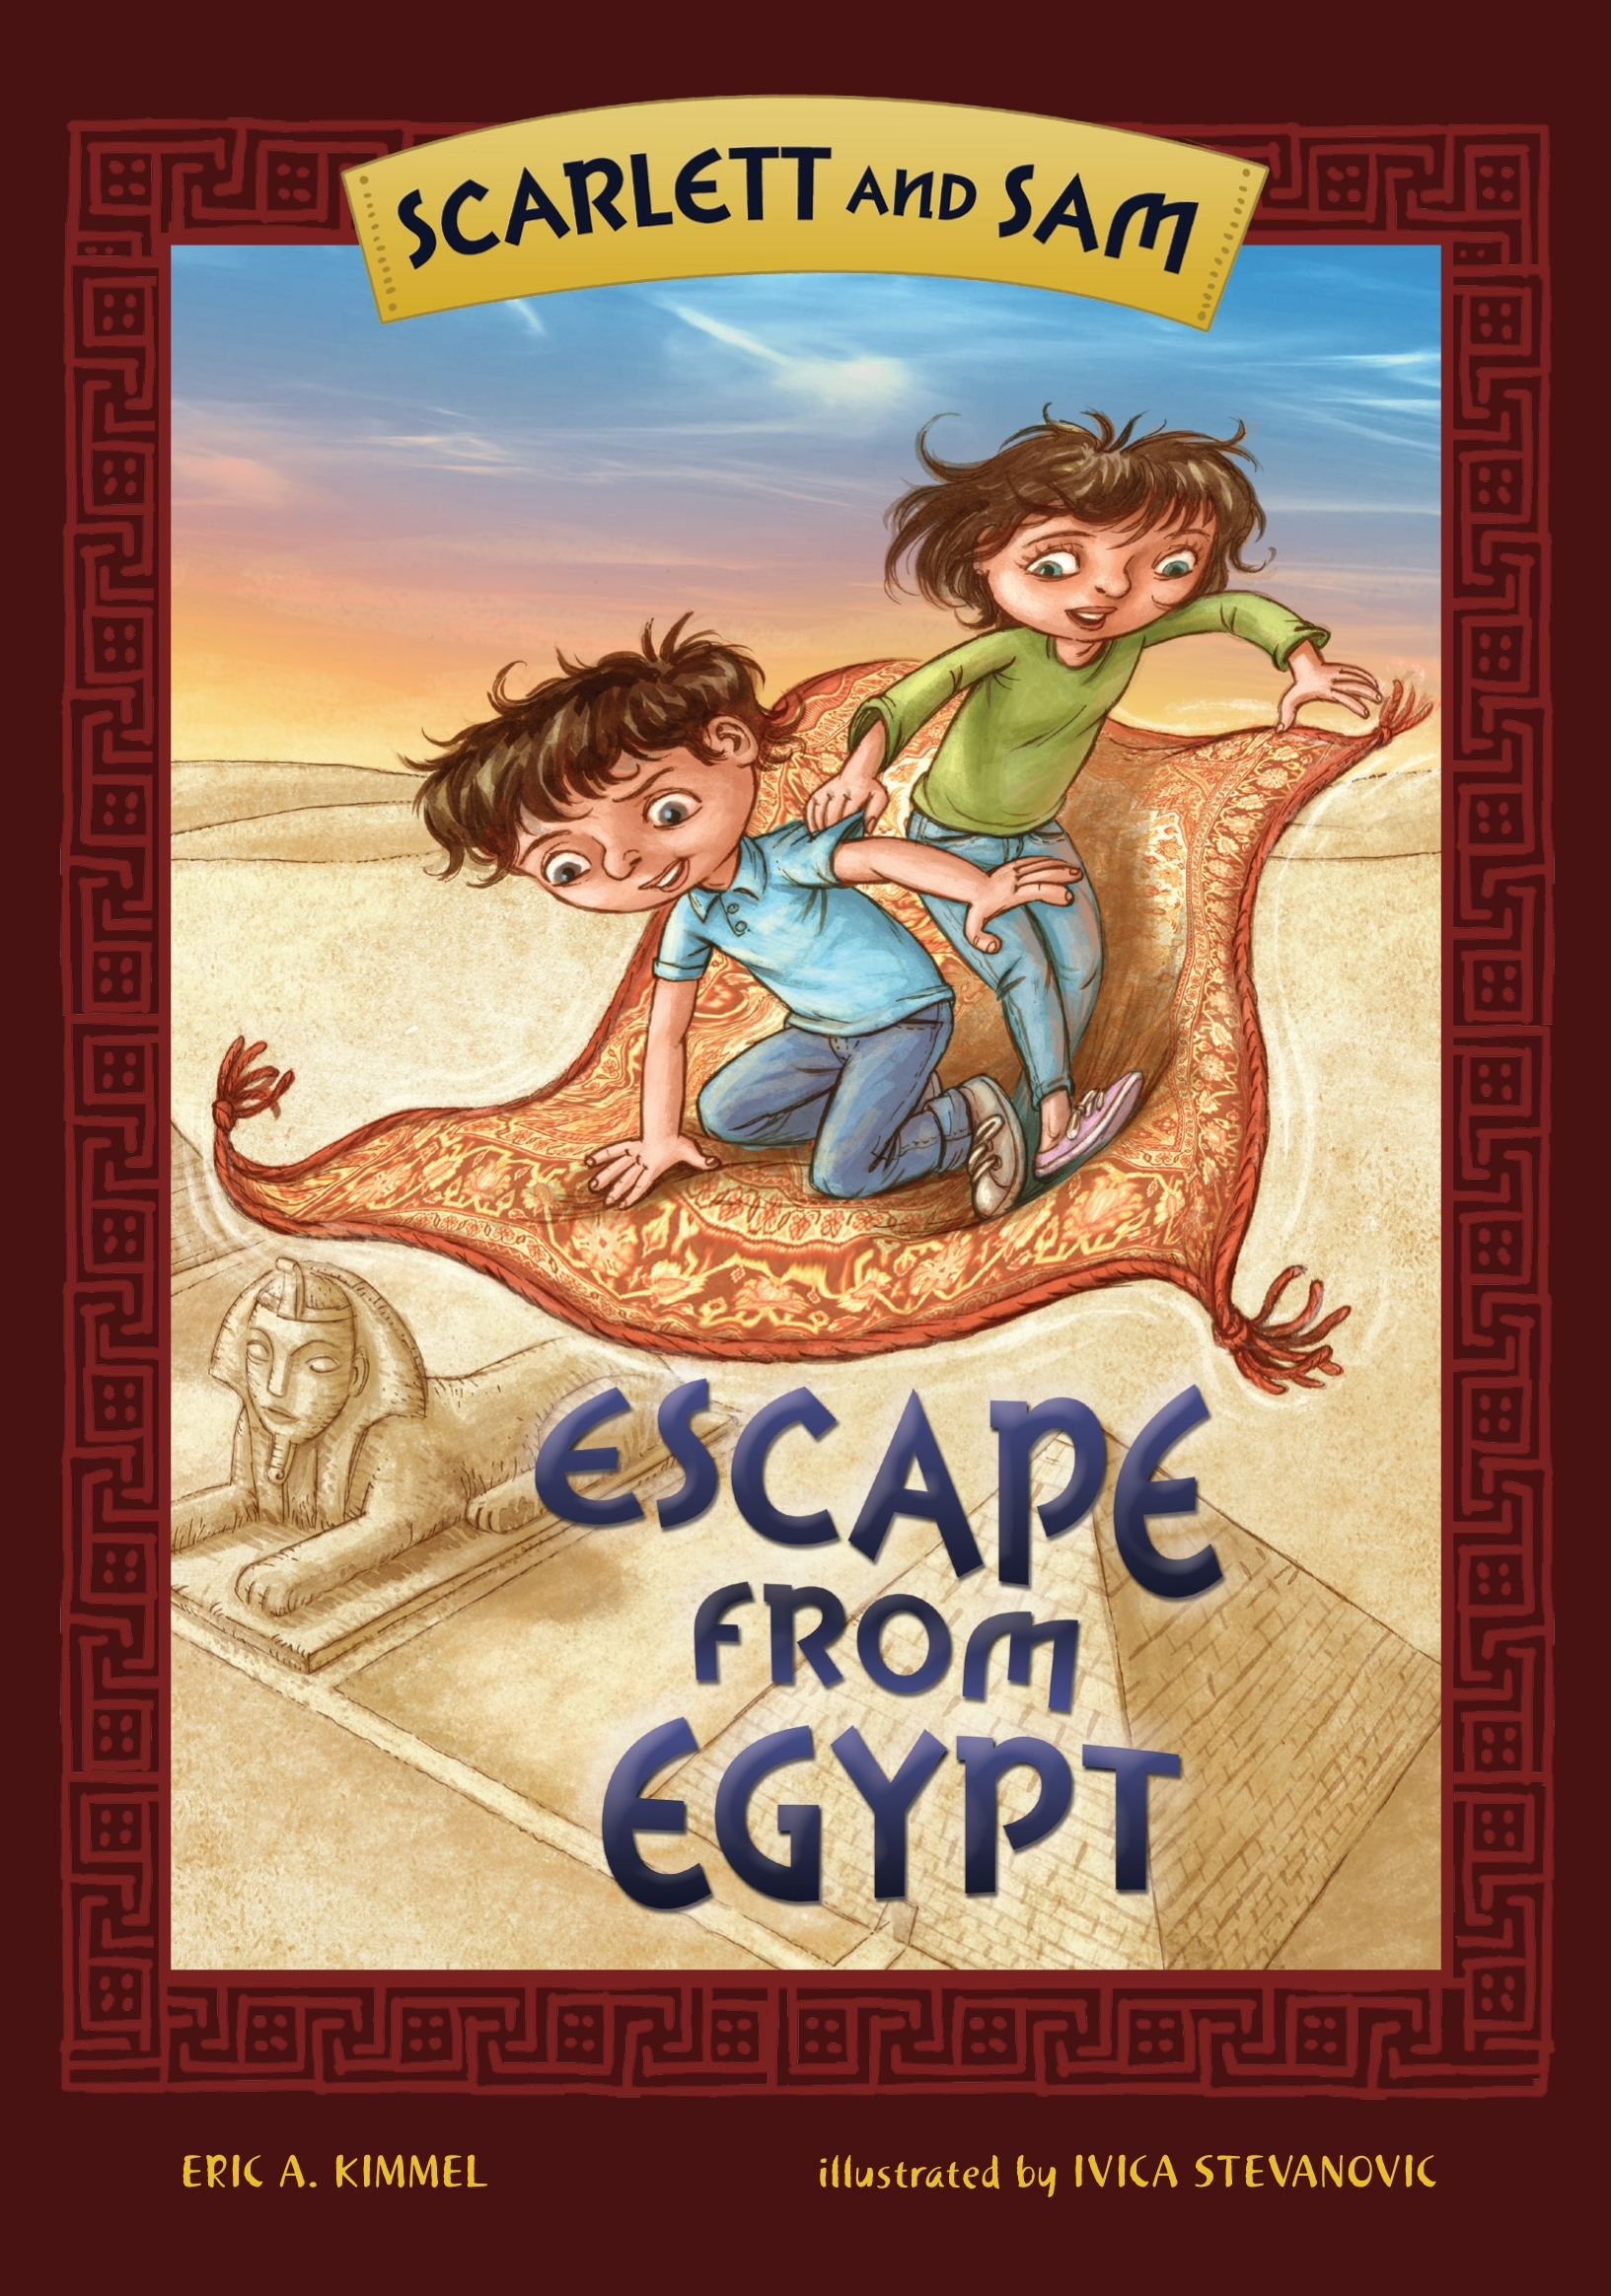 In "Scarlett and Sam: Escape From Egypt," twins are transported back to the time of Moses and Aaron as they prepare to lead the Israelites out of slavery. (Courtesy of Kar-Ben Publishing)